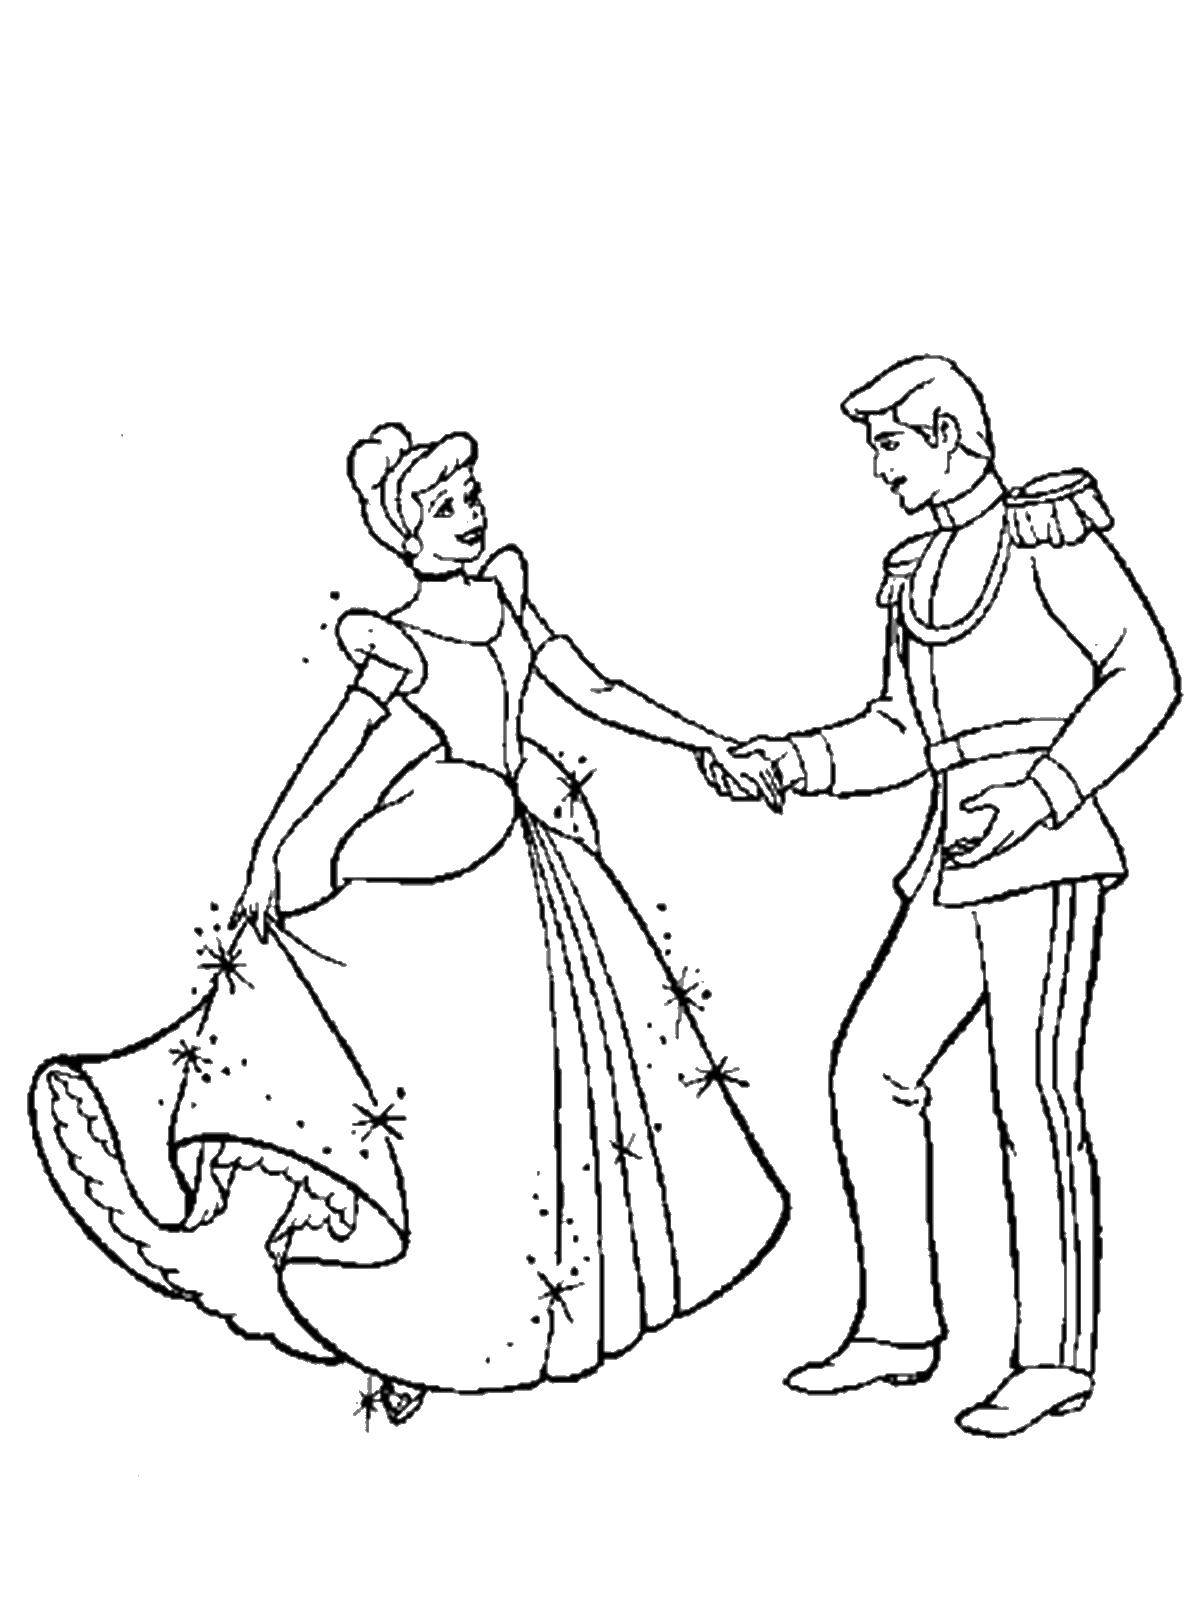 Coloring Cinderella and the Prince at the ball. Category Cinderella. Tags:  Cinderella, Prince.